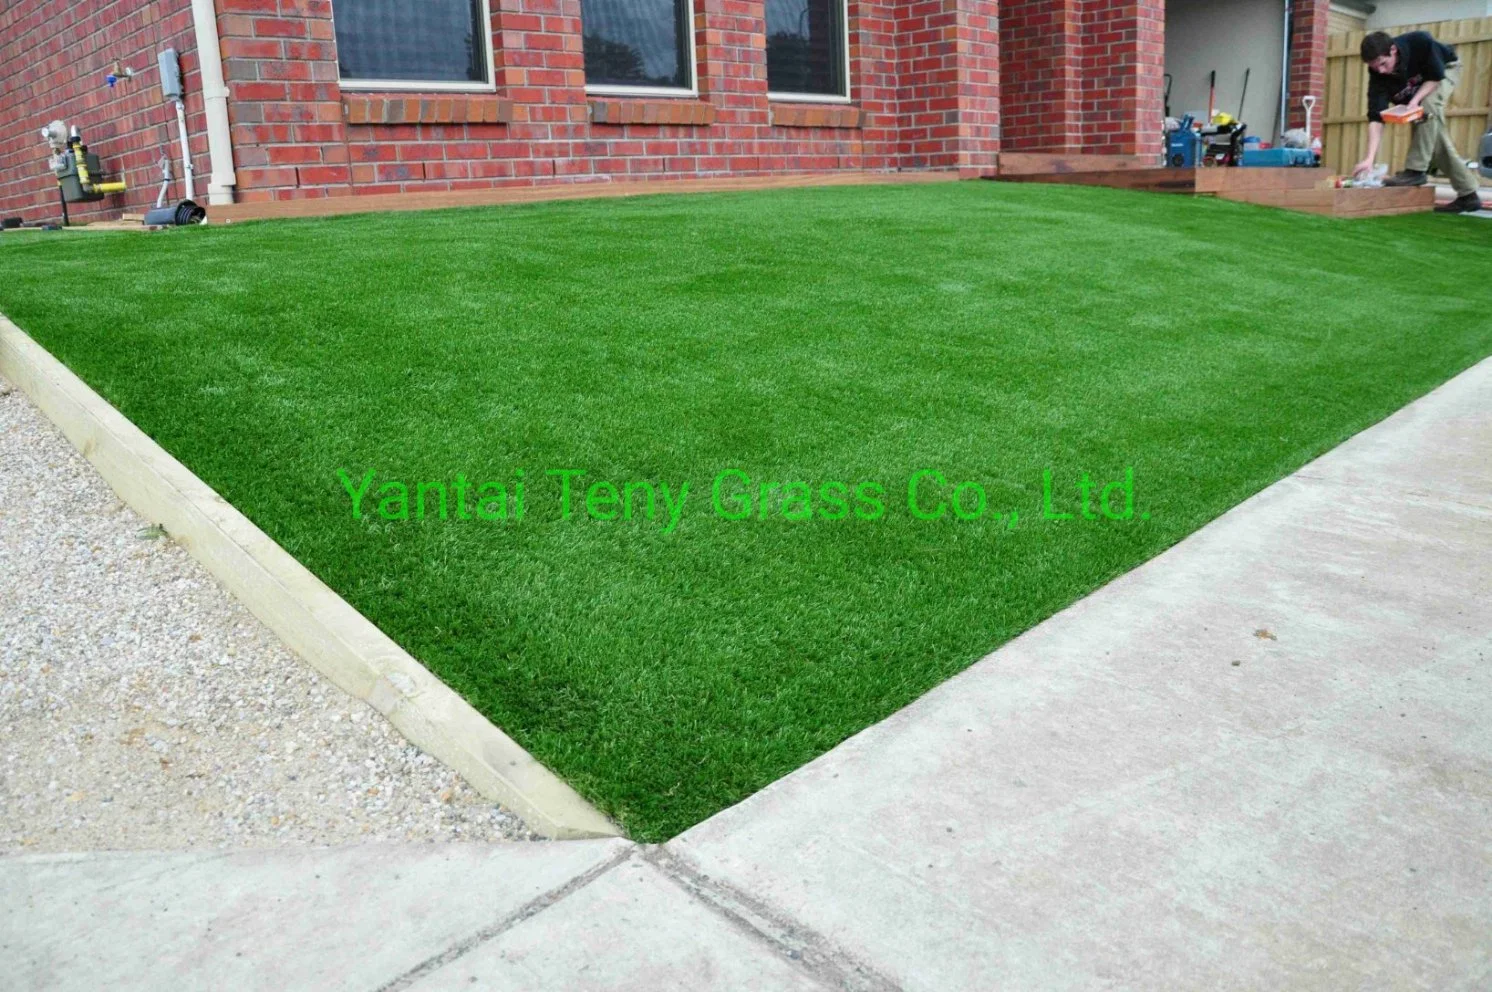 High quality/High cost performance  False Imitation Fake Artificial Synthetic Grass Turf Lawn Carpet Mat Flooring for Football Soccer Sports and Landscaping